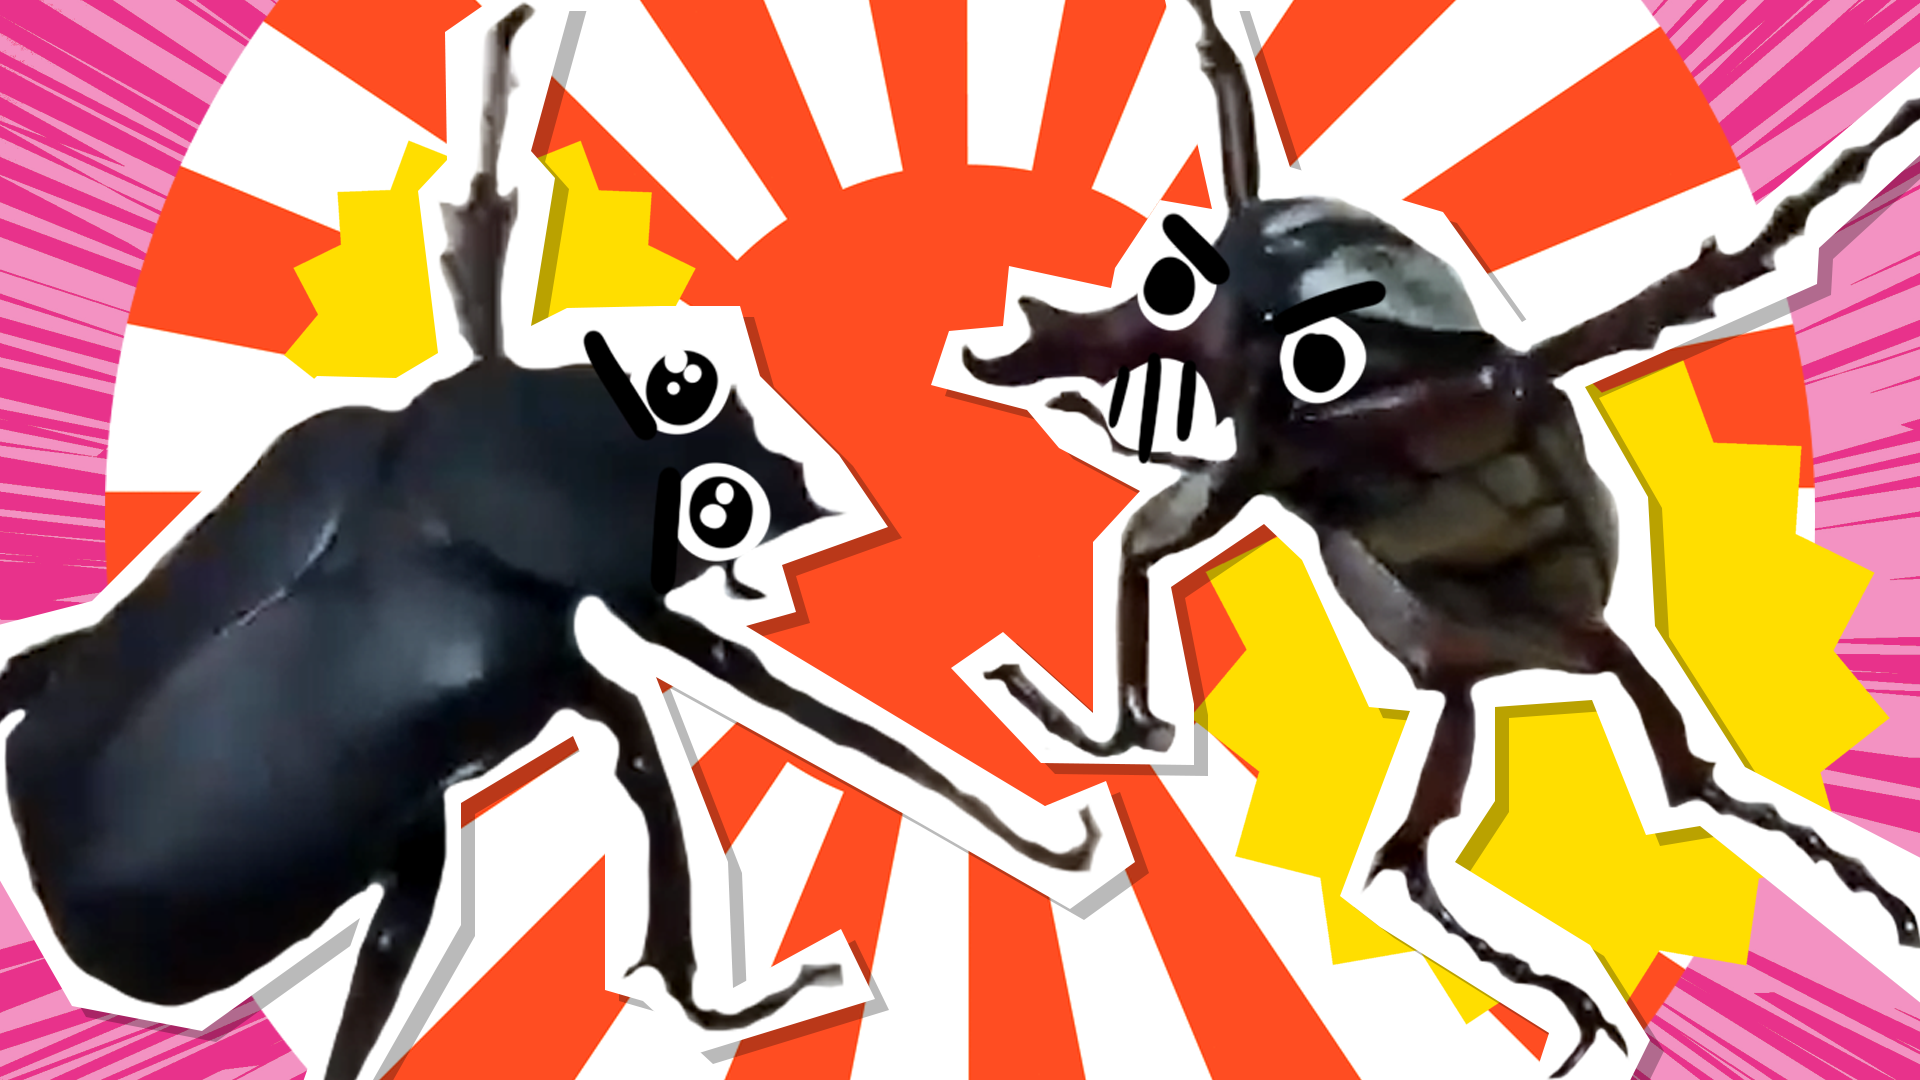 Two Beetles fighting with anime eyes